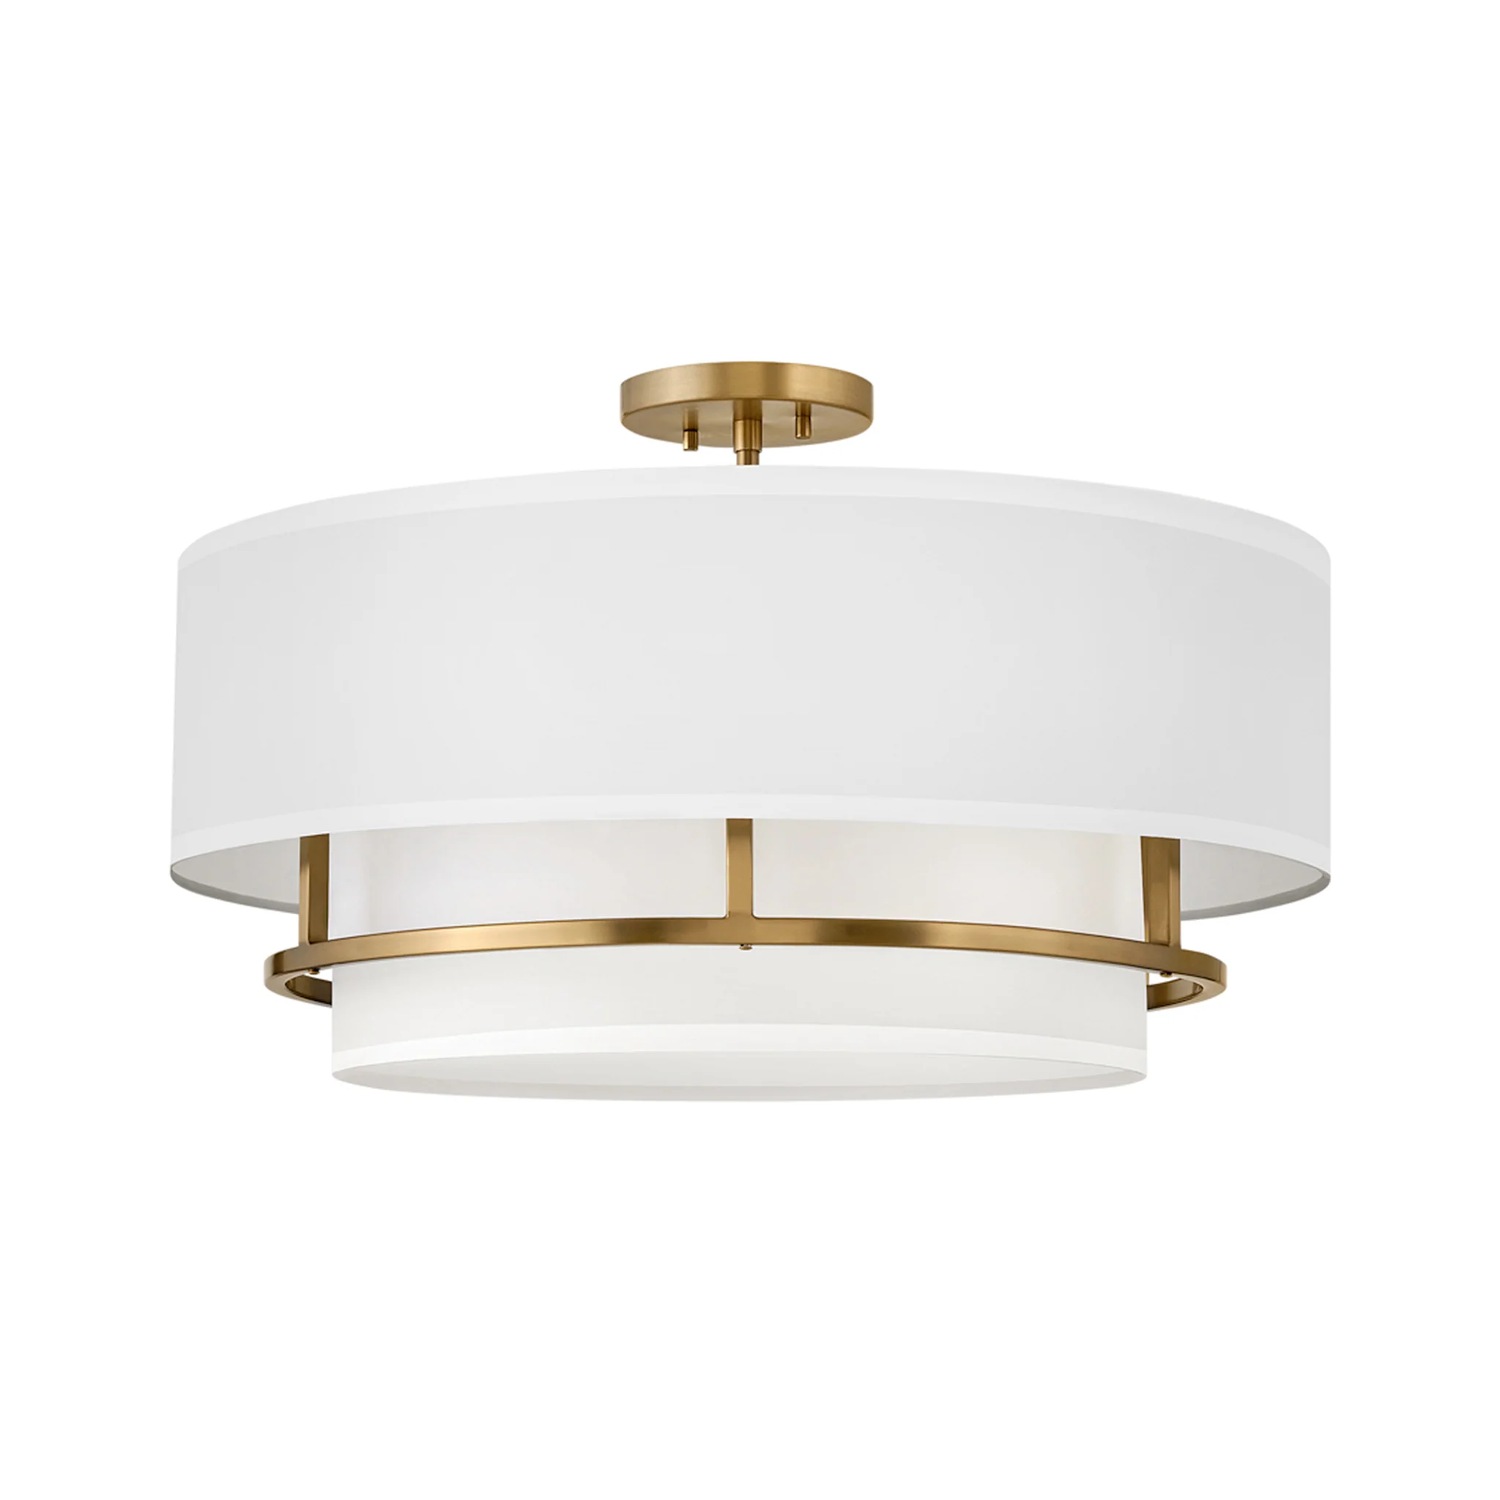 Product image of Graham Brass 580mm Ceiling Light